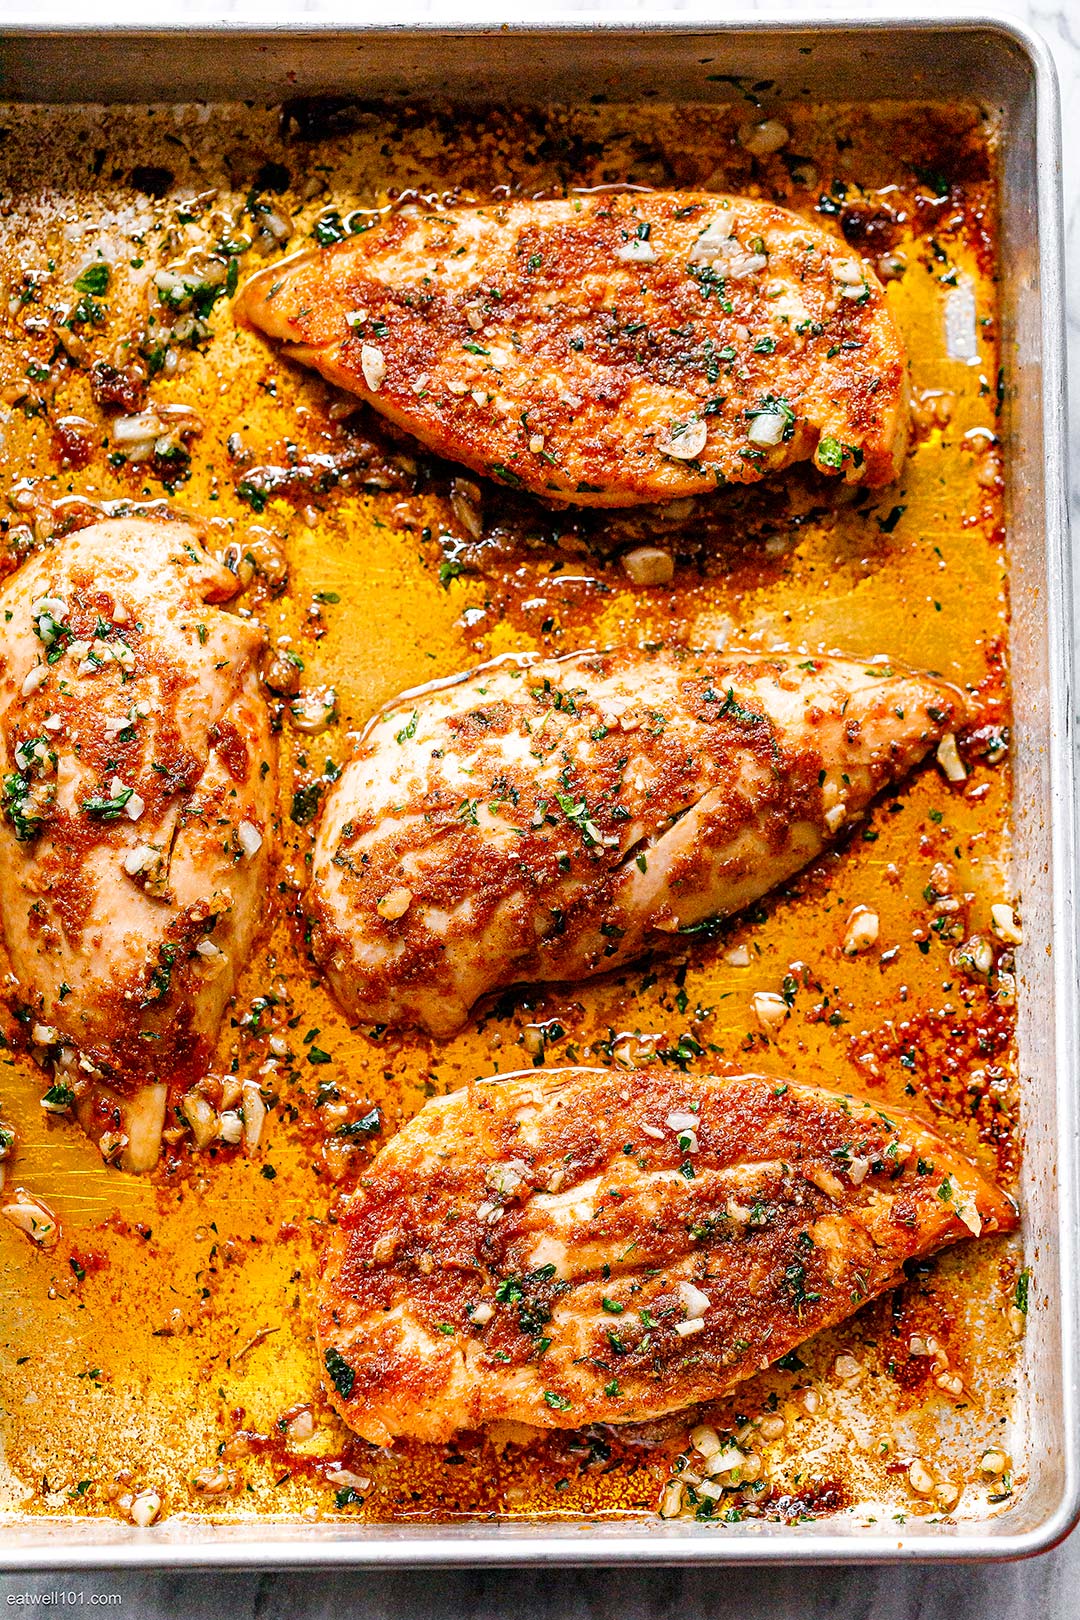 Juicy Oven-Baked Chicken Breasts Recipe – How to Bake Chicken Breasts ...